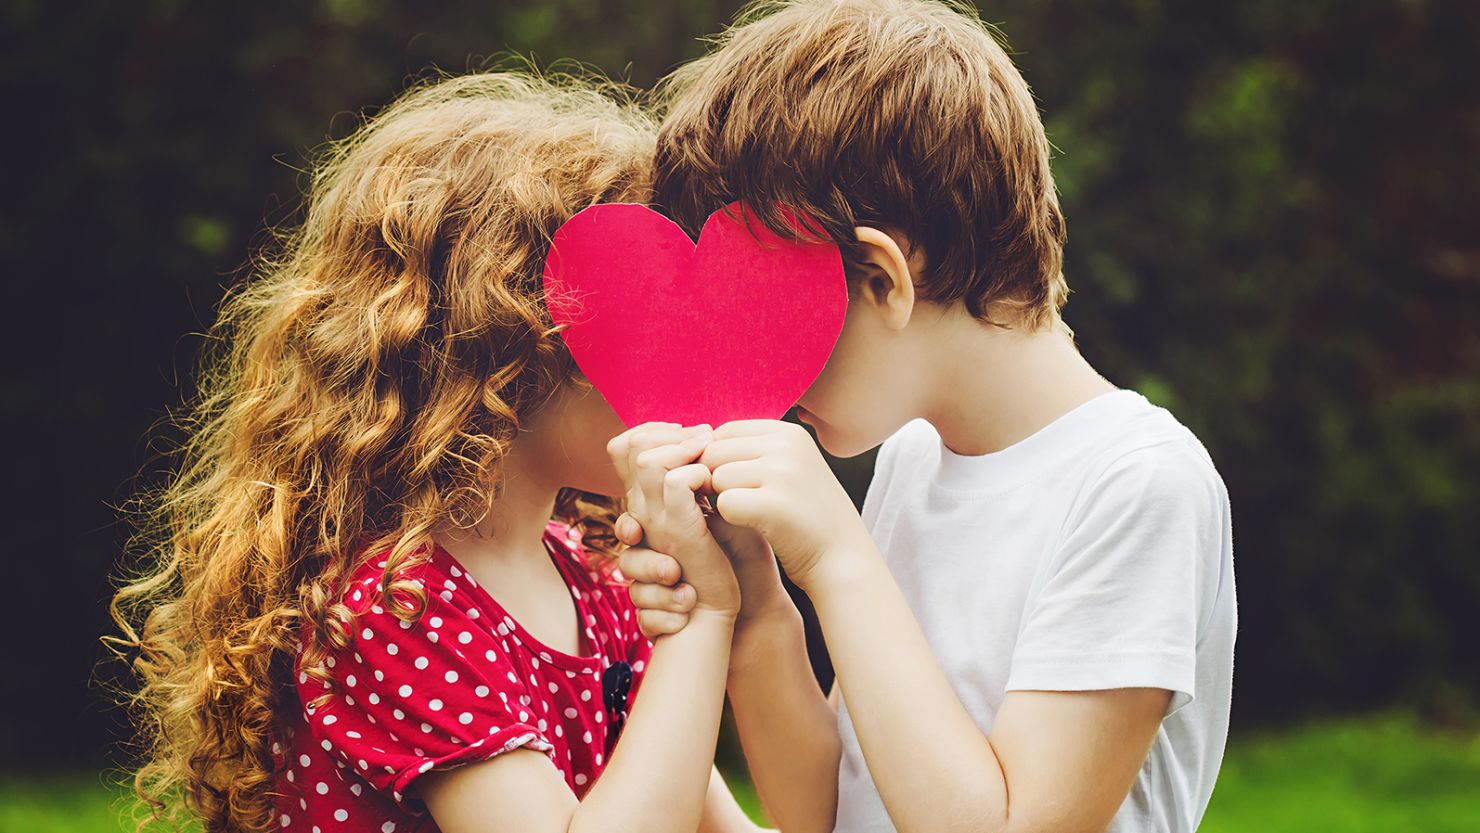 Why your kid's crush should be taken seriously